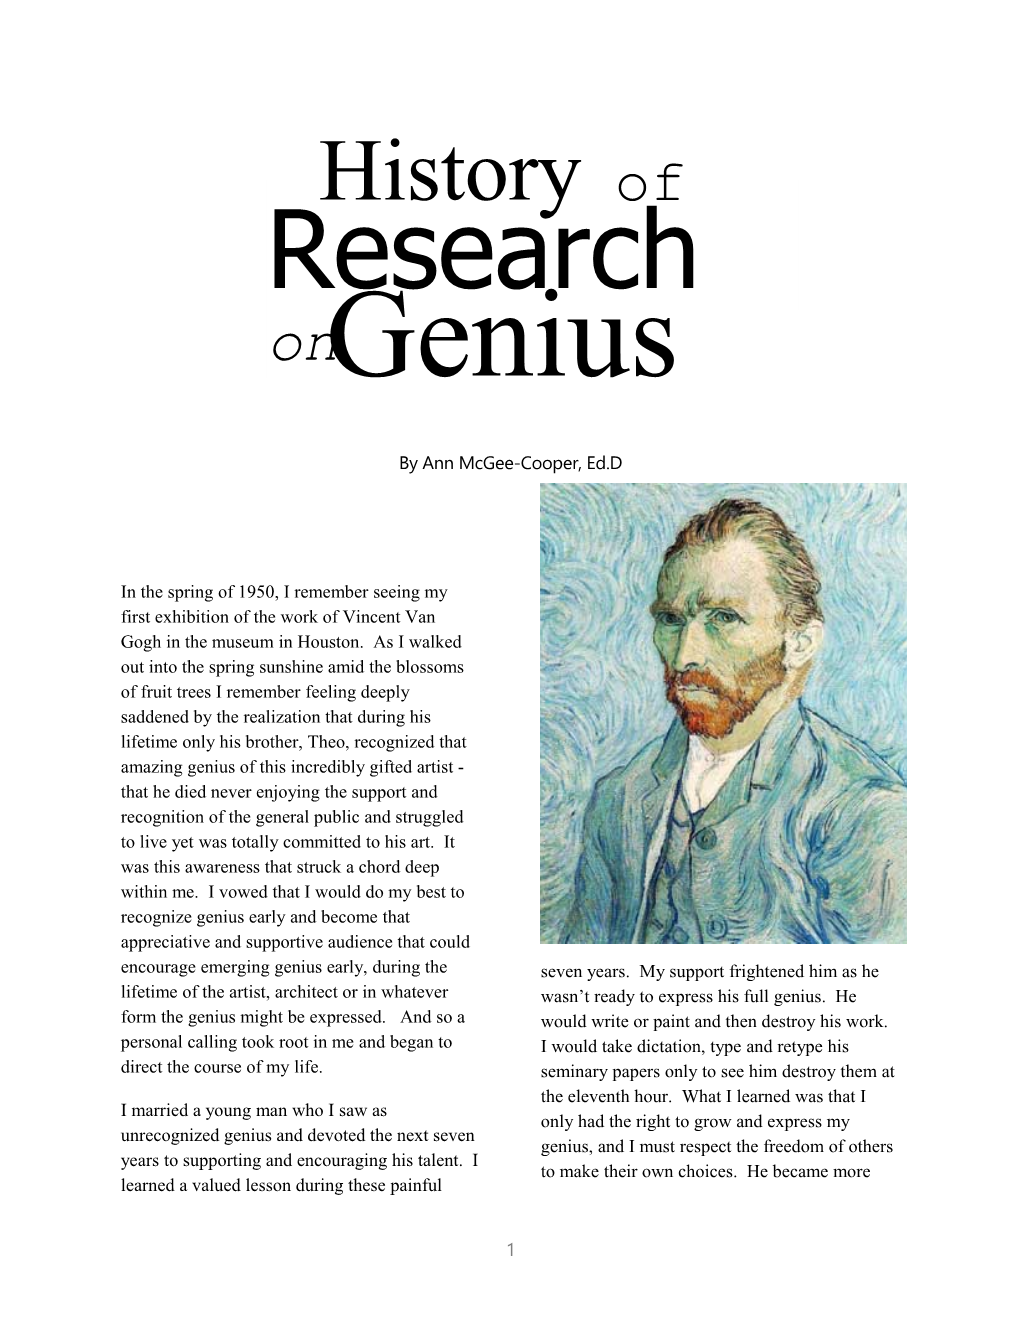 History of Research on Genius